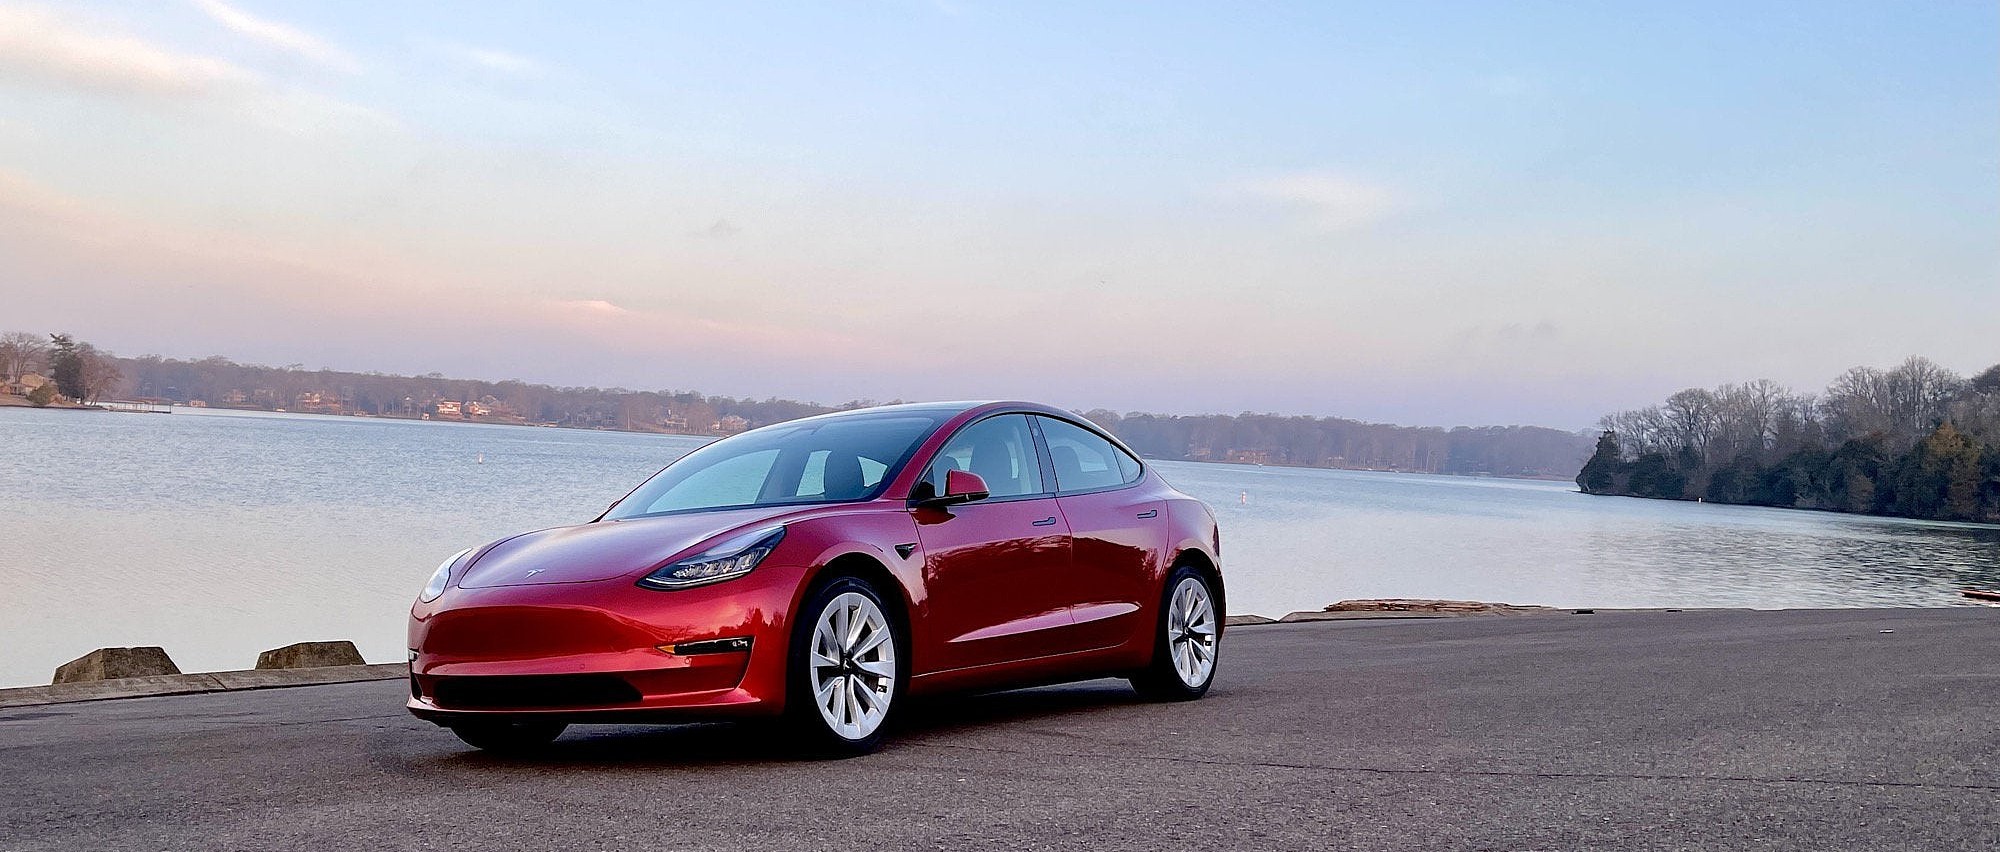 Tesla Model 3 just became cheaper than Toyota Camry in California